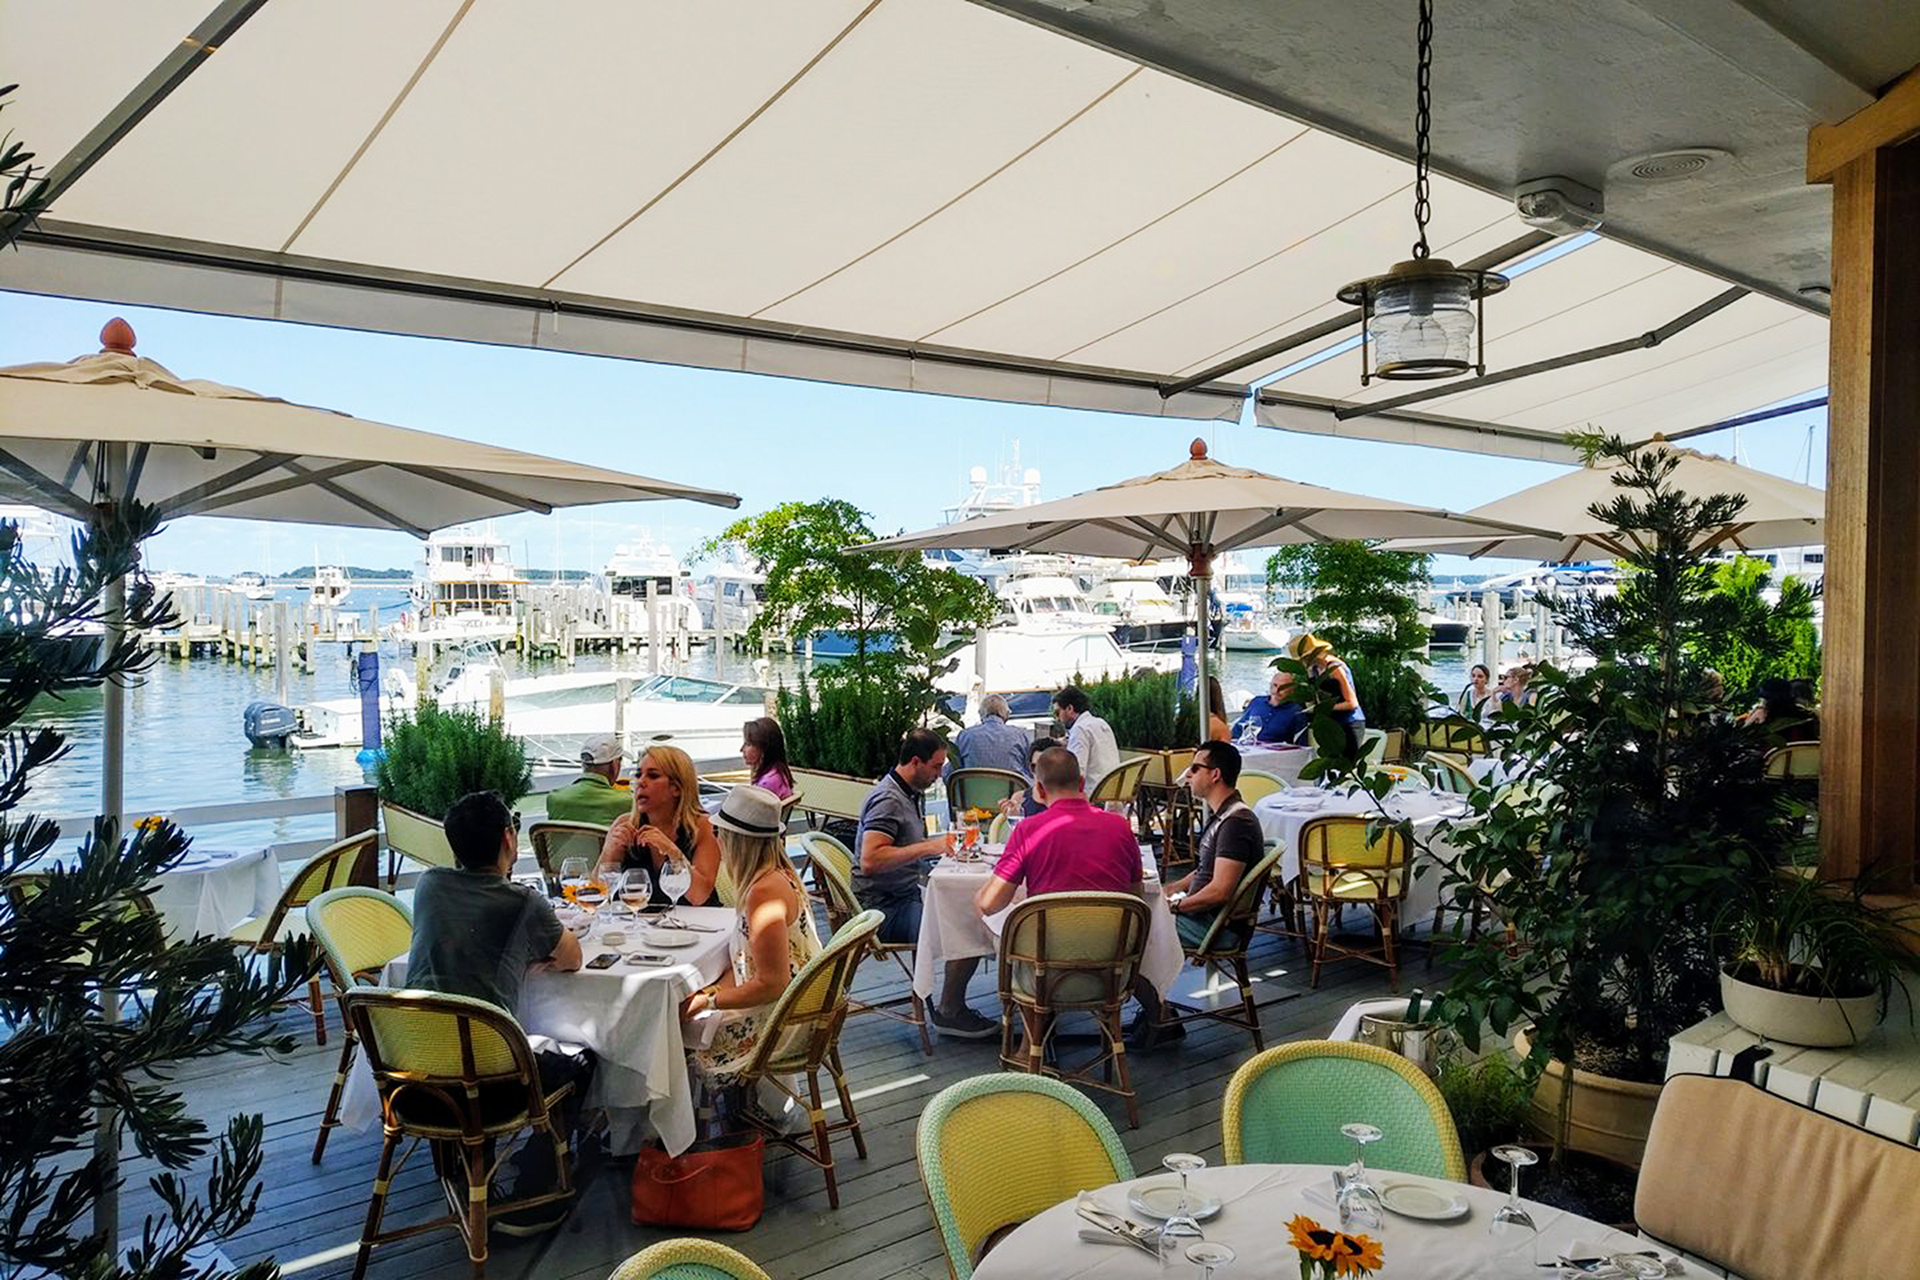 Good luck getting reservations at Le Bilboquet on Long Wharf in Sag Harbor